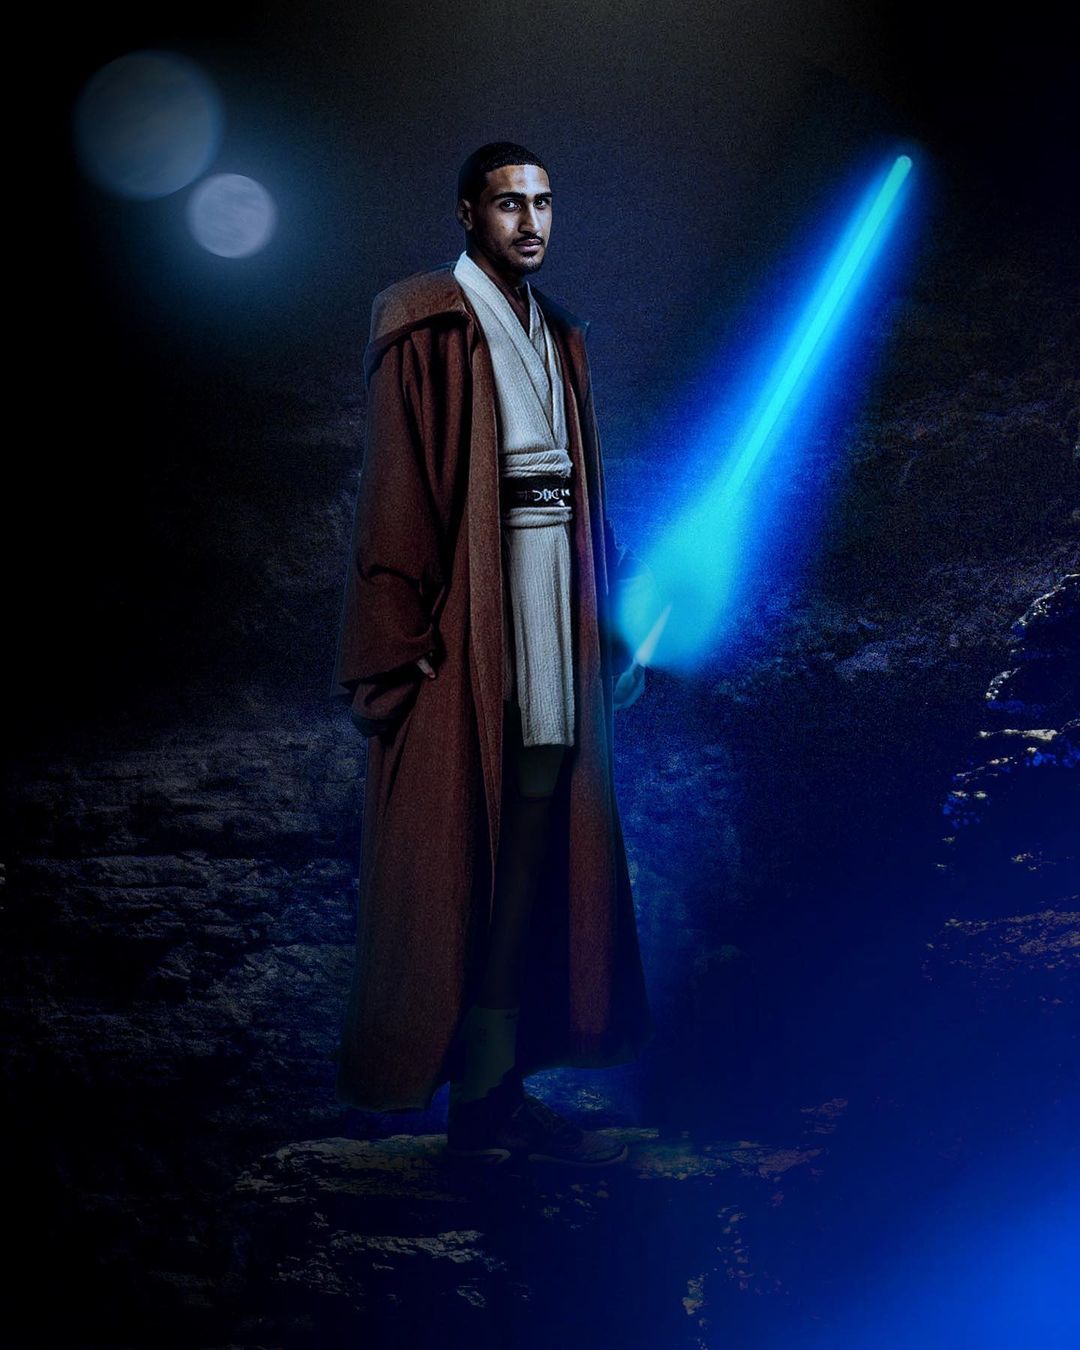 Hit ’em with the force like Obi. #maythe4thbewithyou...